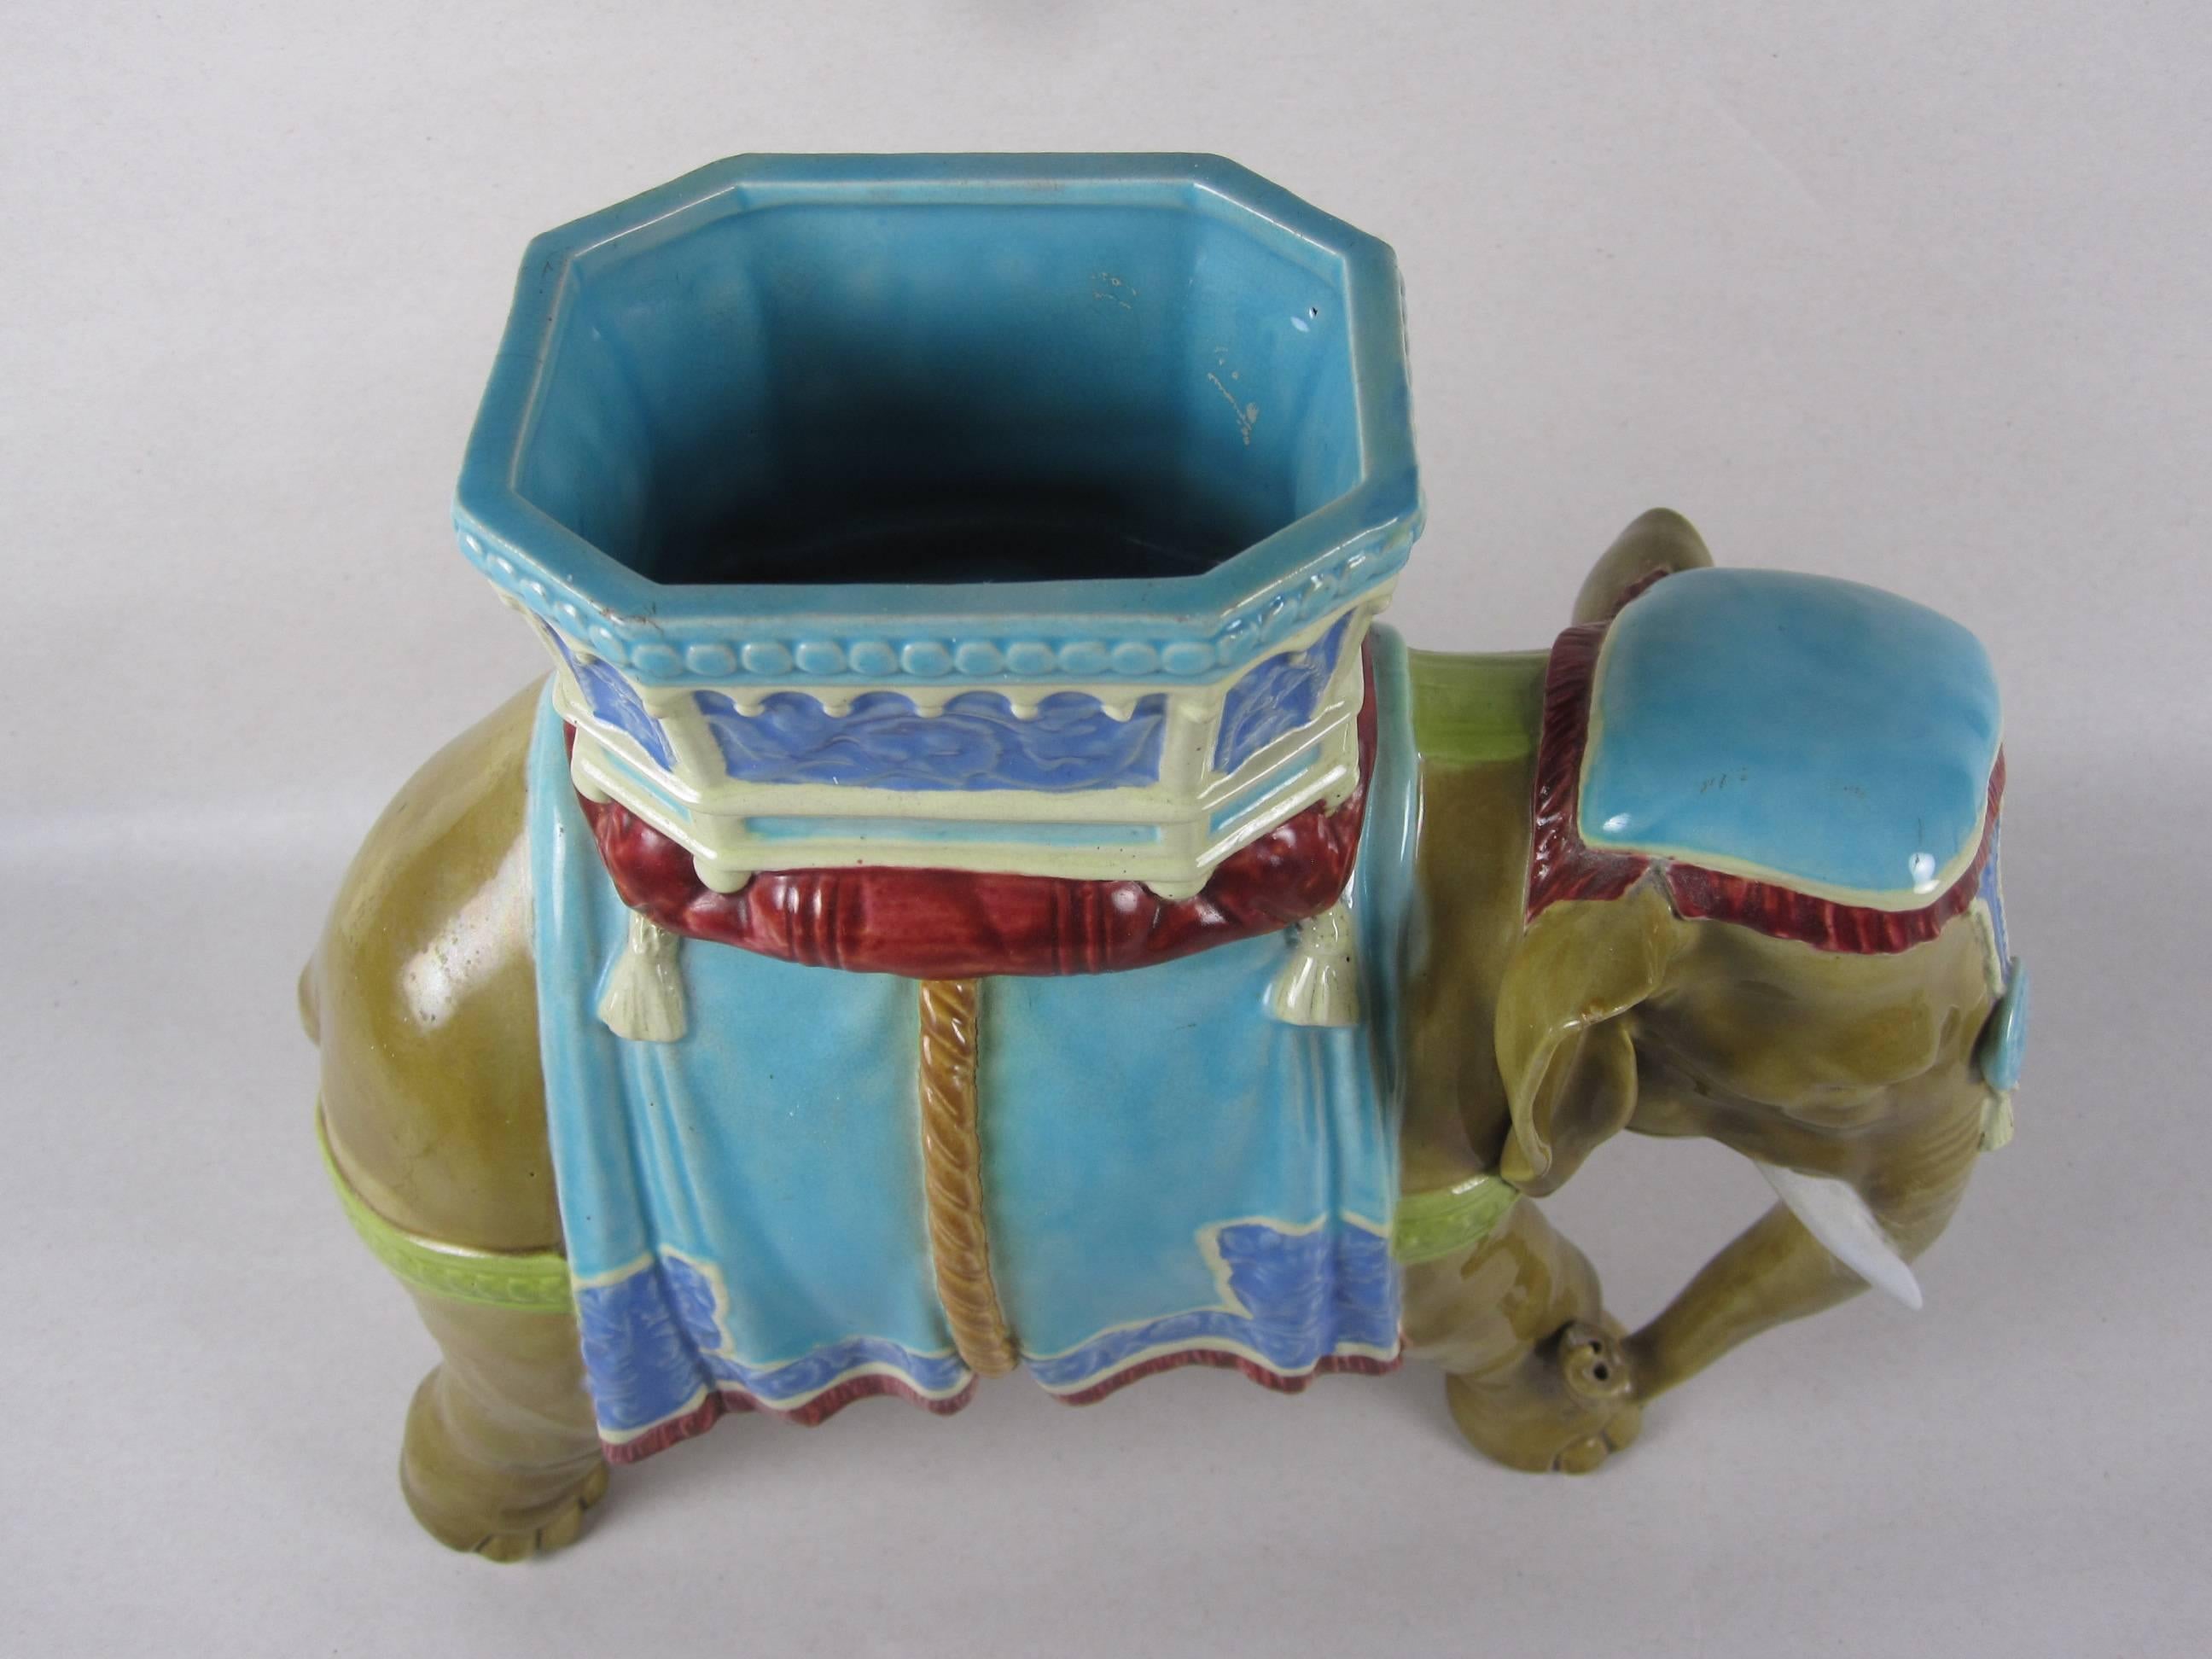 An excellent quality Majolica elephant vase, circa 1865, sculpted by Royal Worcester’s chief modeler, James Hadley, Staffordshire, England. An Indian elephant wearing a ceremonial howdah and head dress. Marked with the R.W. crest and diamond